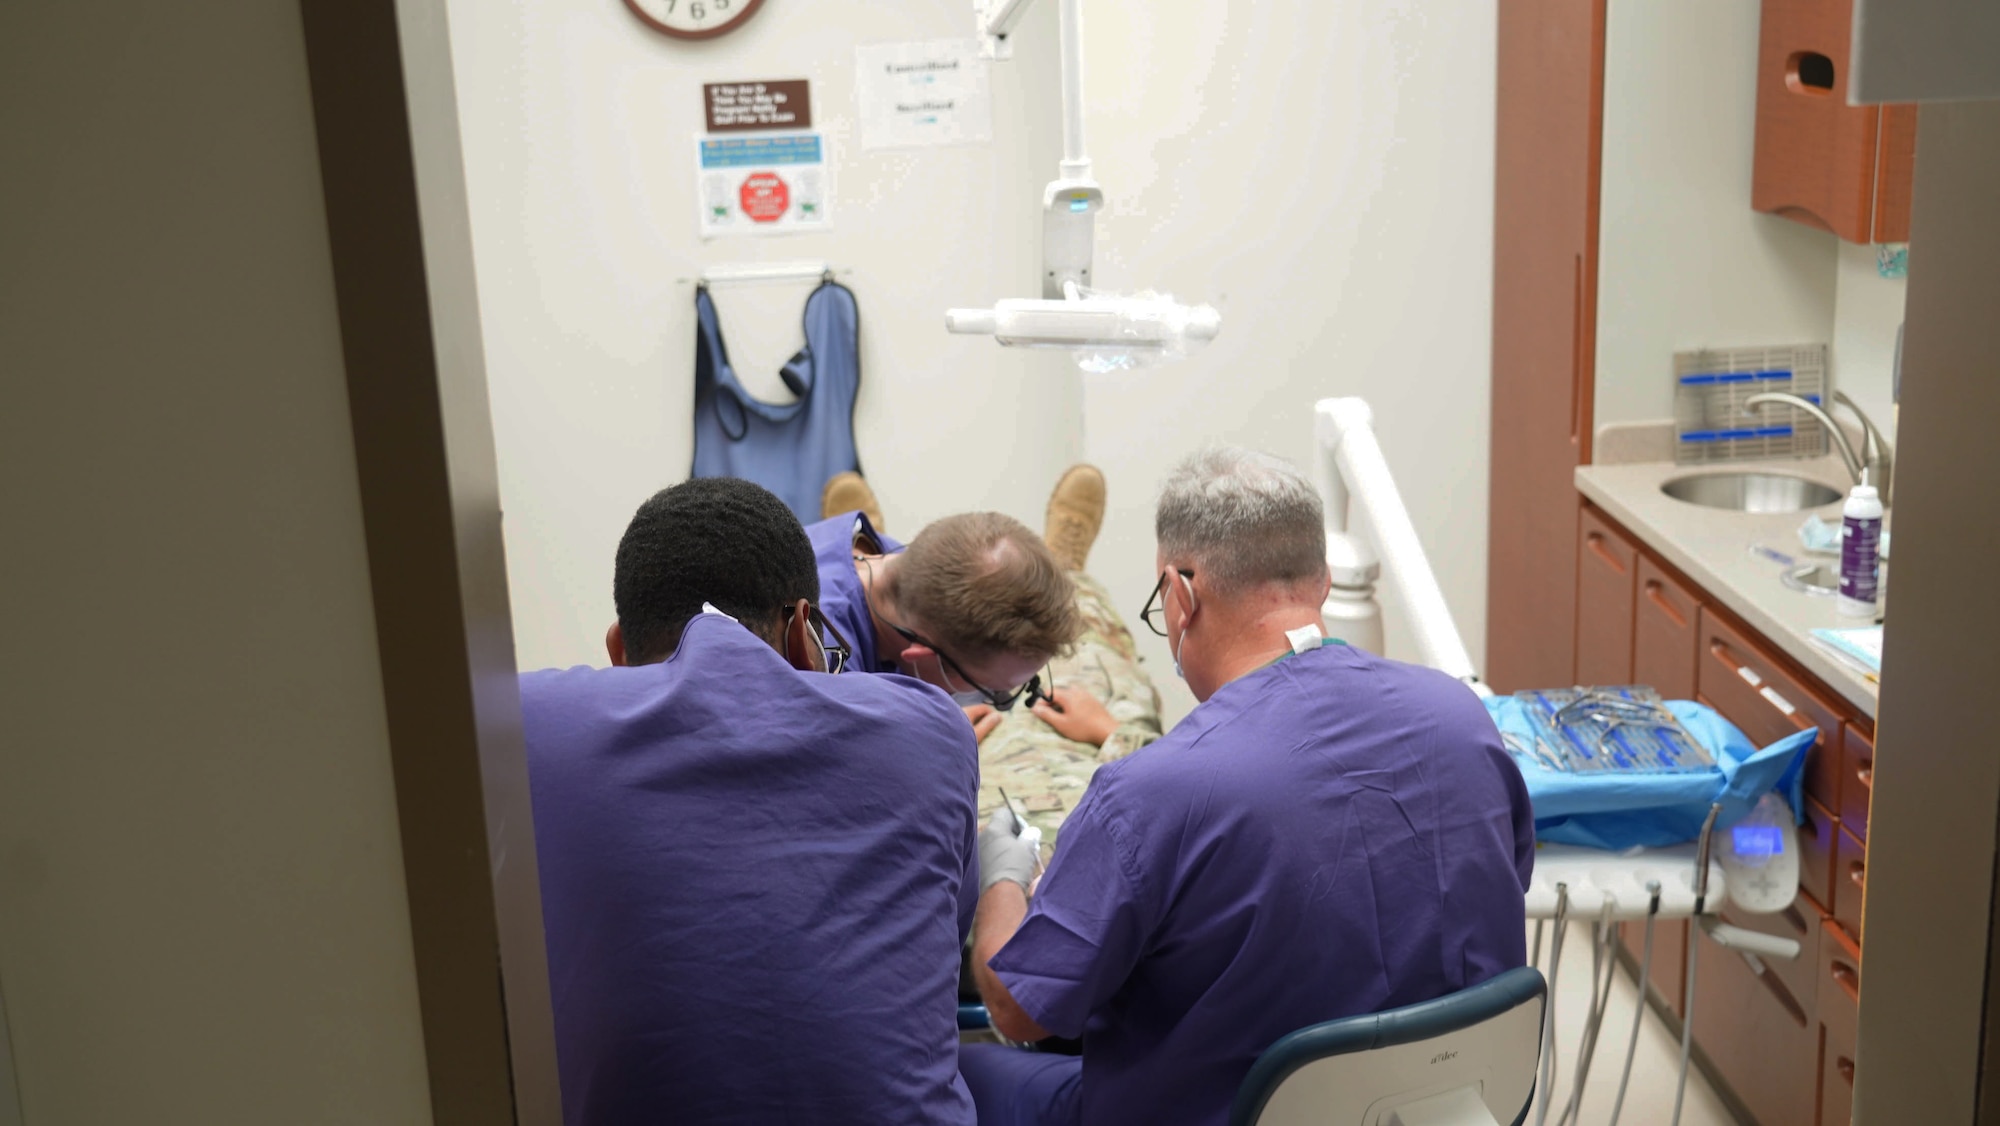 Four men sit in the middle of the photo, performing dental work.